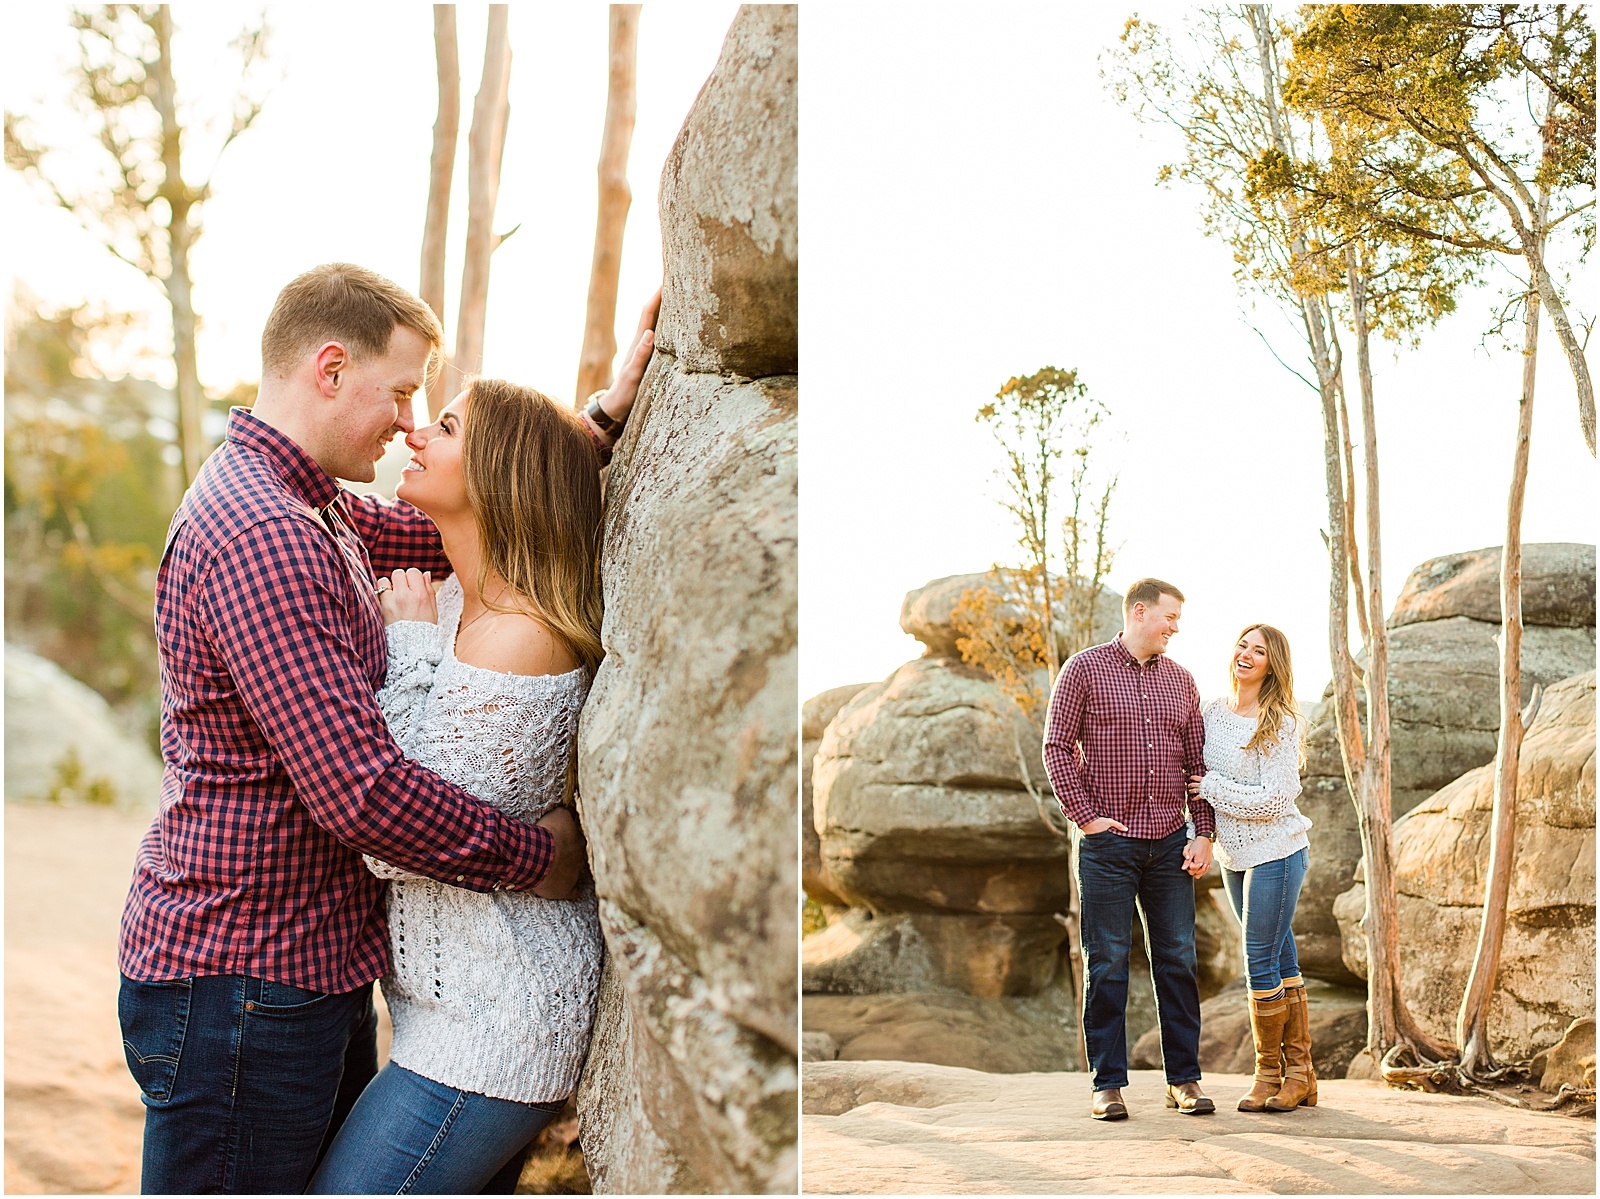 A Sunny Garden of the Gods Engagement Session | Shiloh and Lee | Bret and Brandie Photography063.jpg